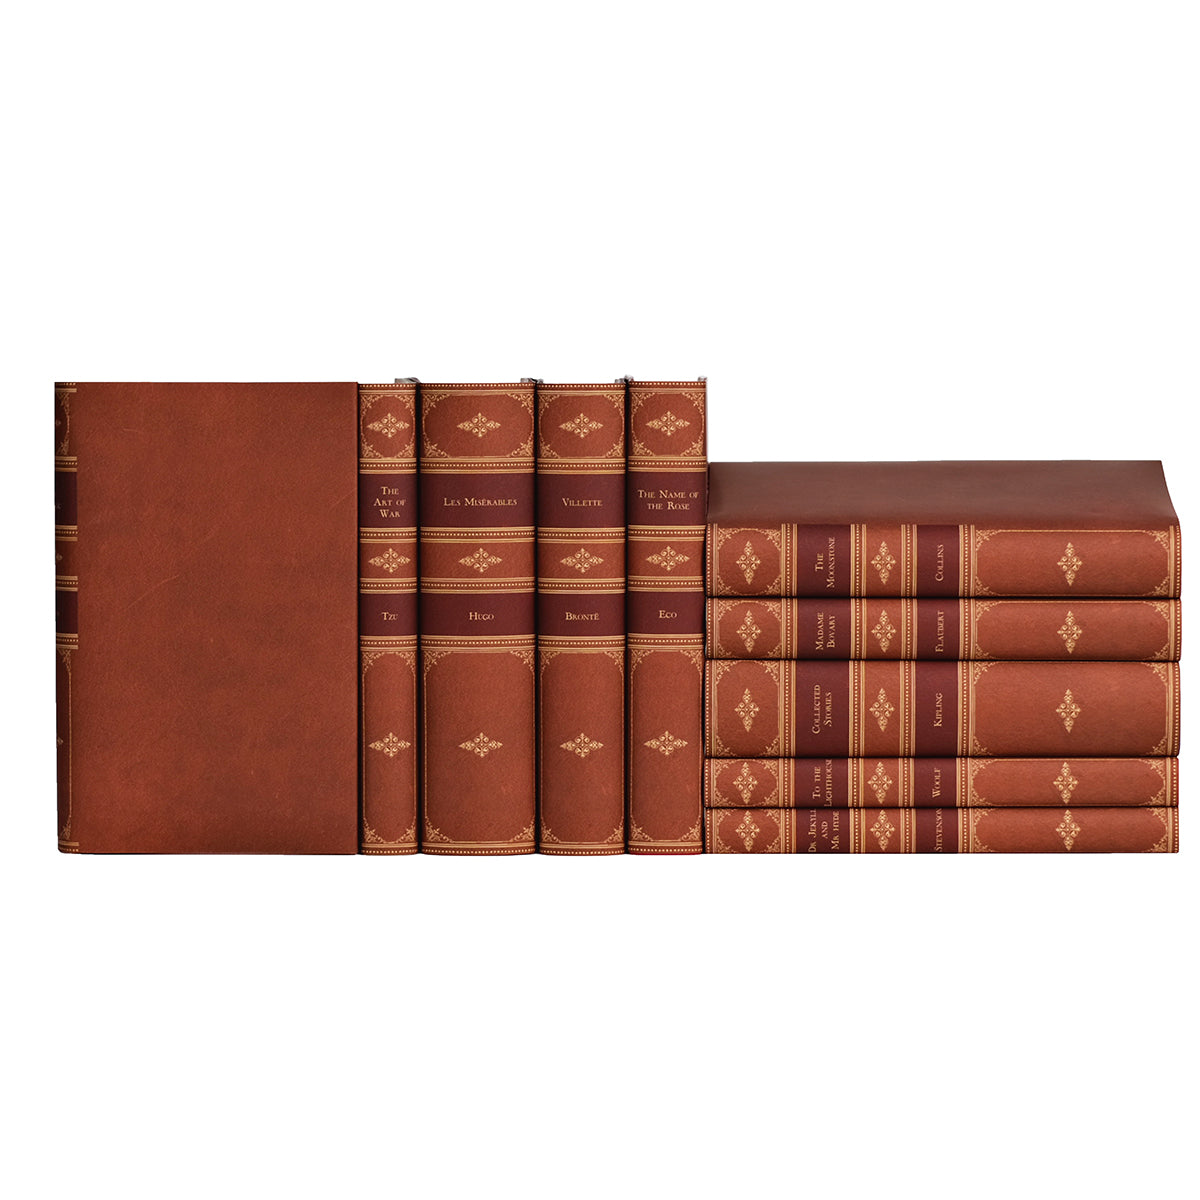 Everyman's Library Classics with Antique Leather-Style Jackets in Sets of 10